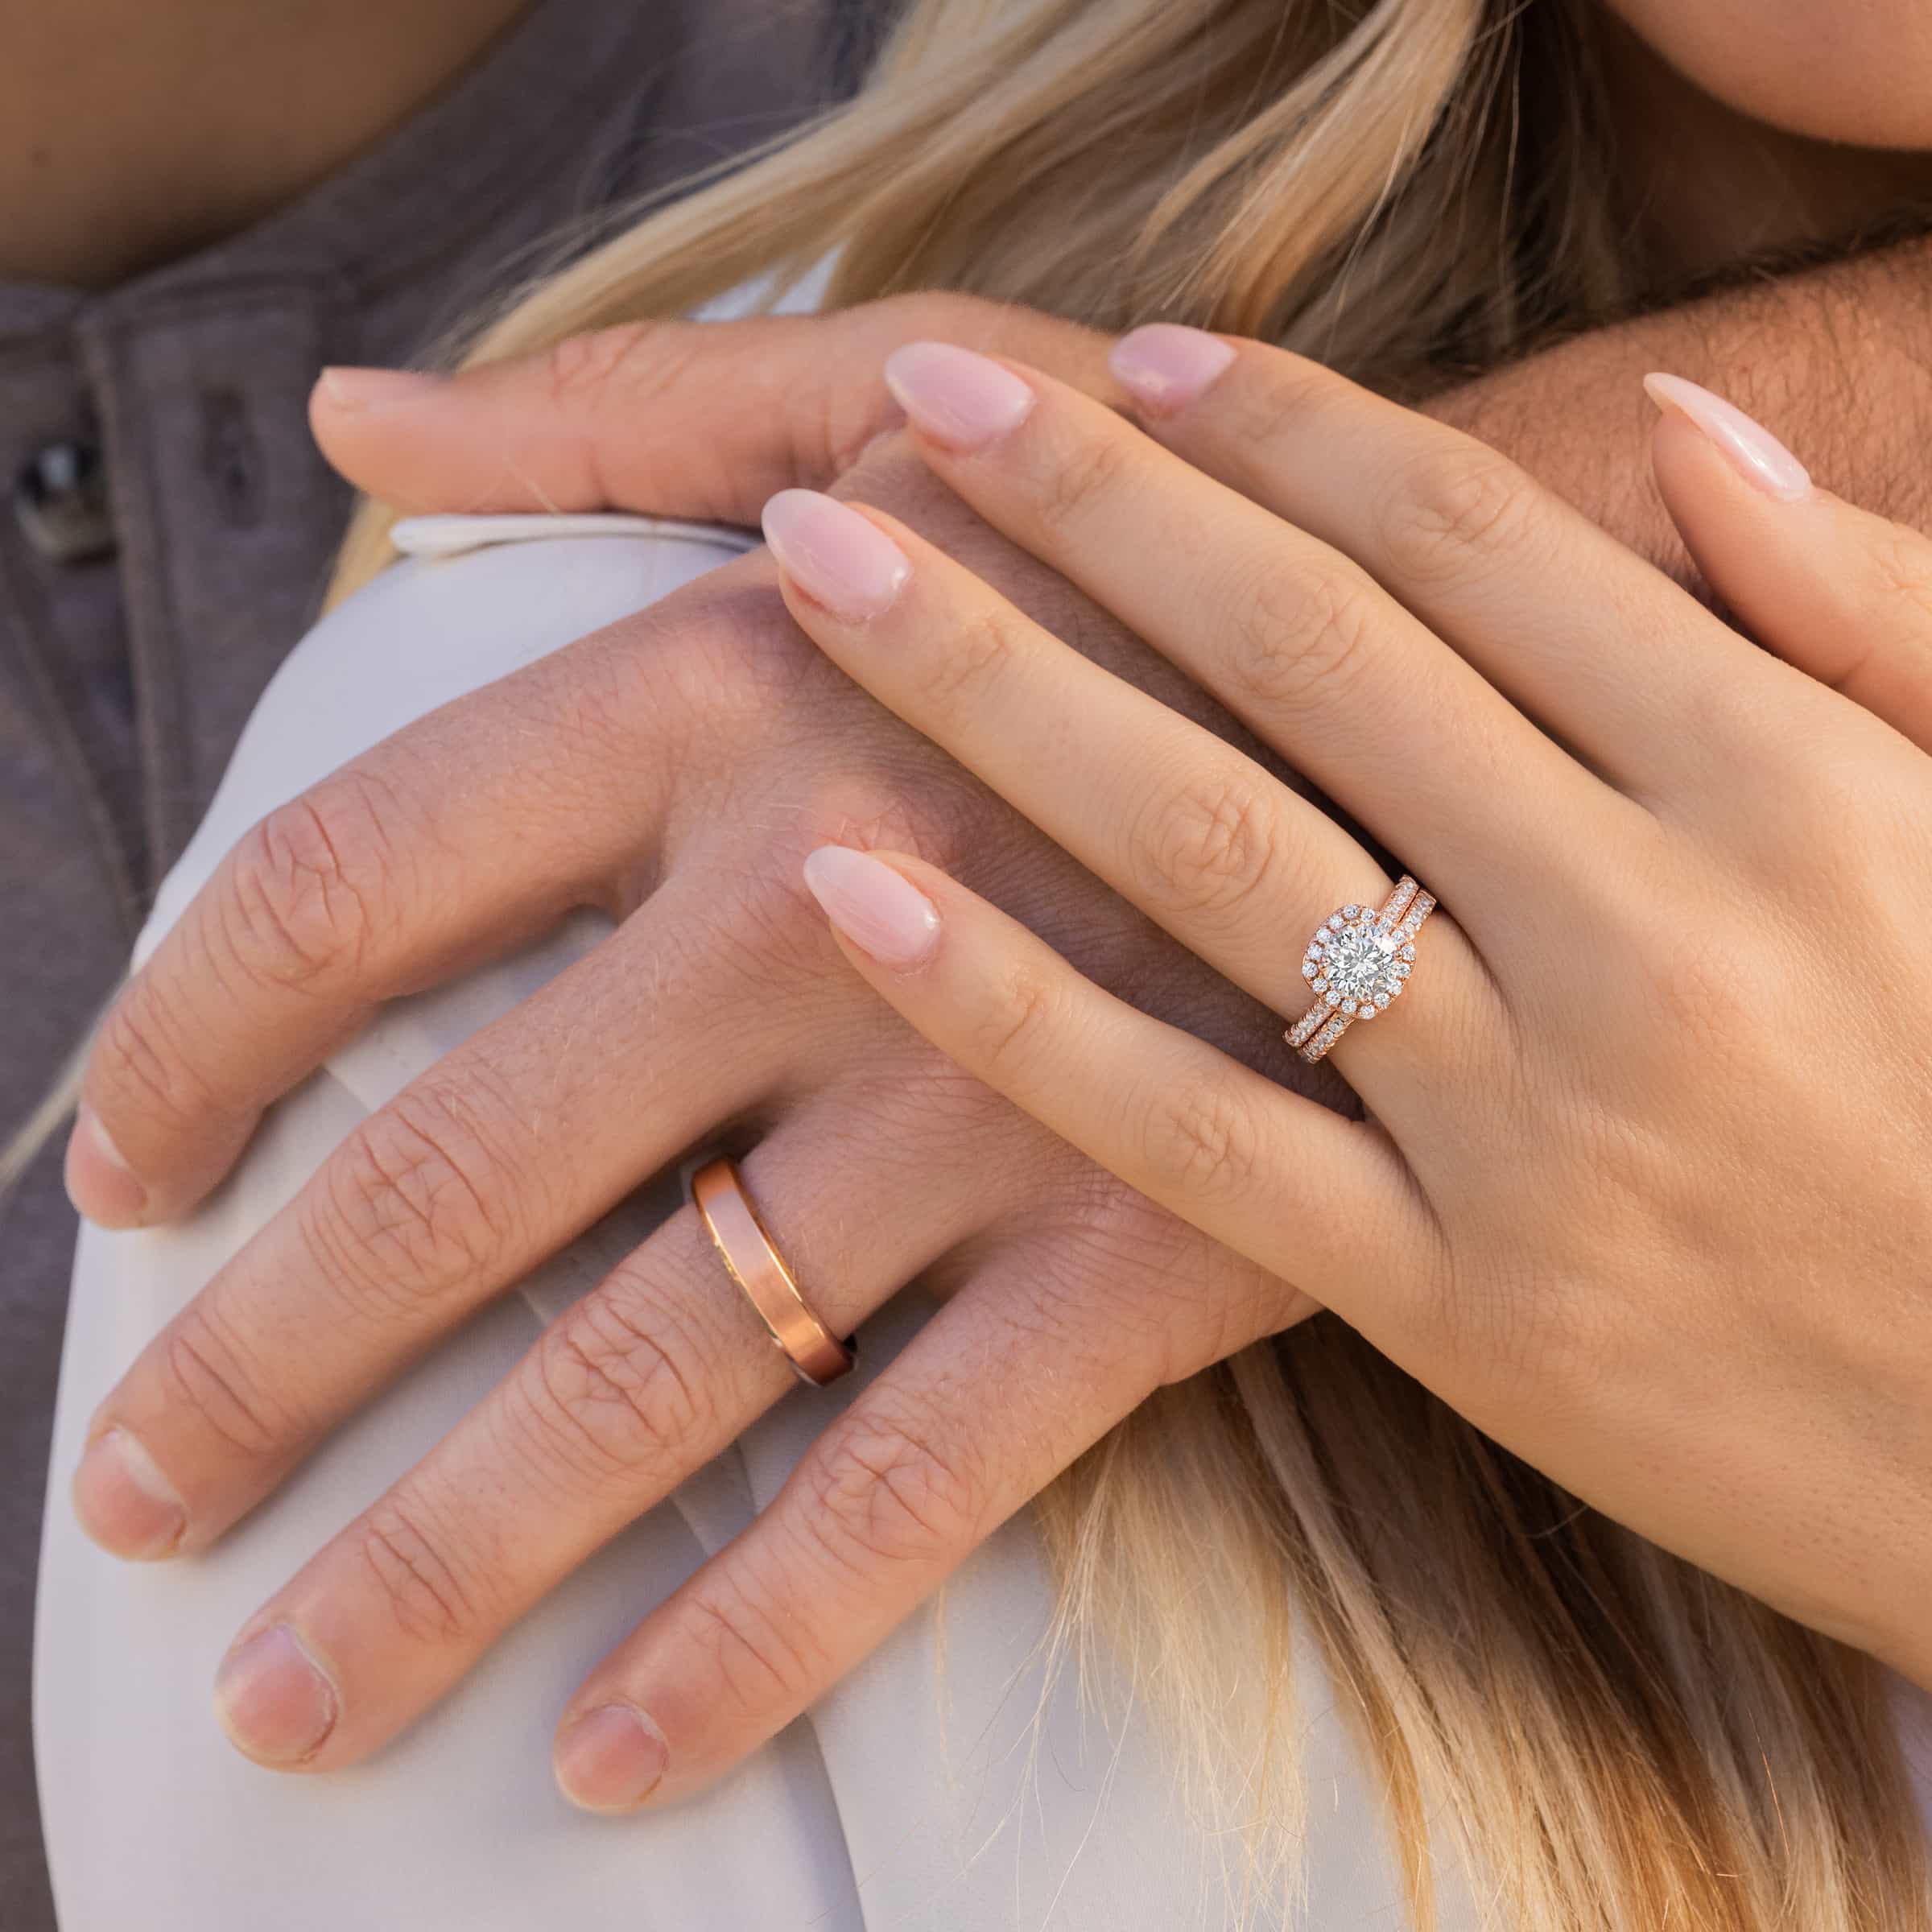 Do Men Wear Engagement Rings? | With Clarity